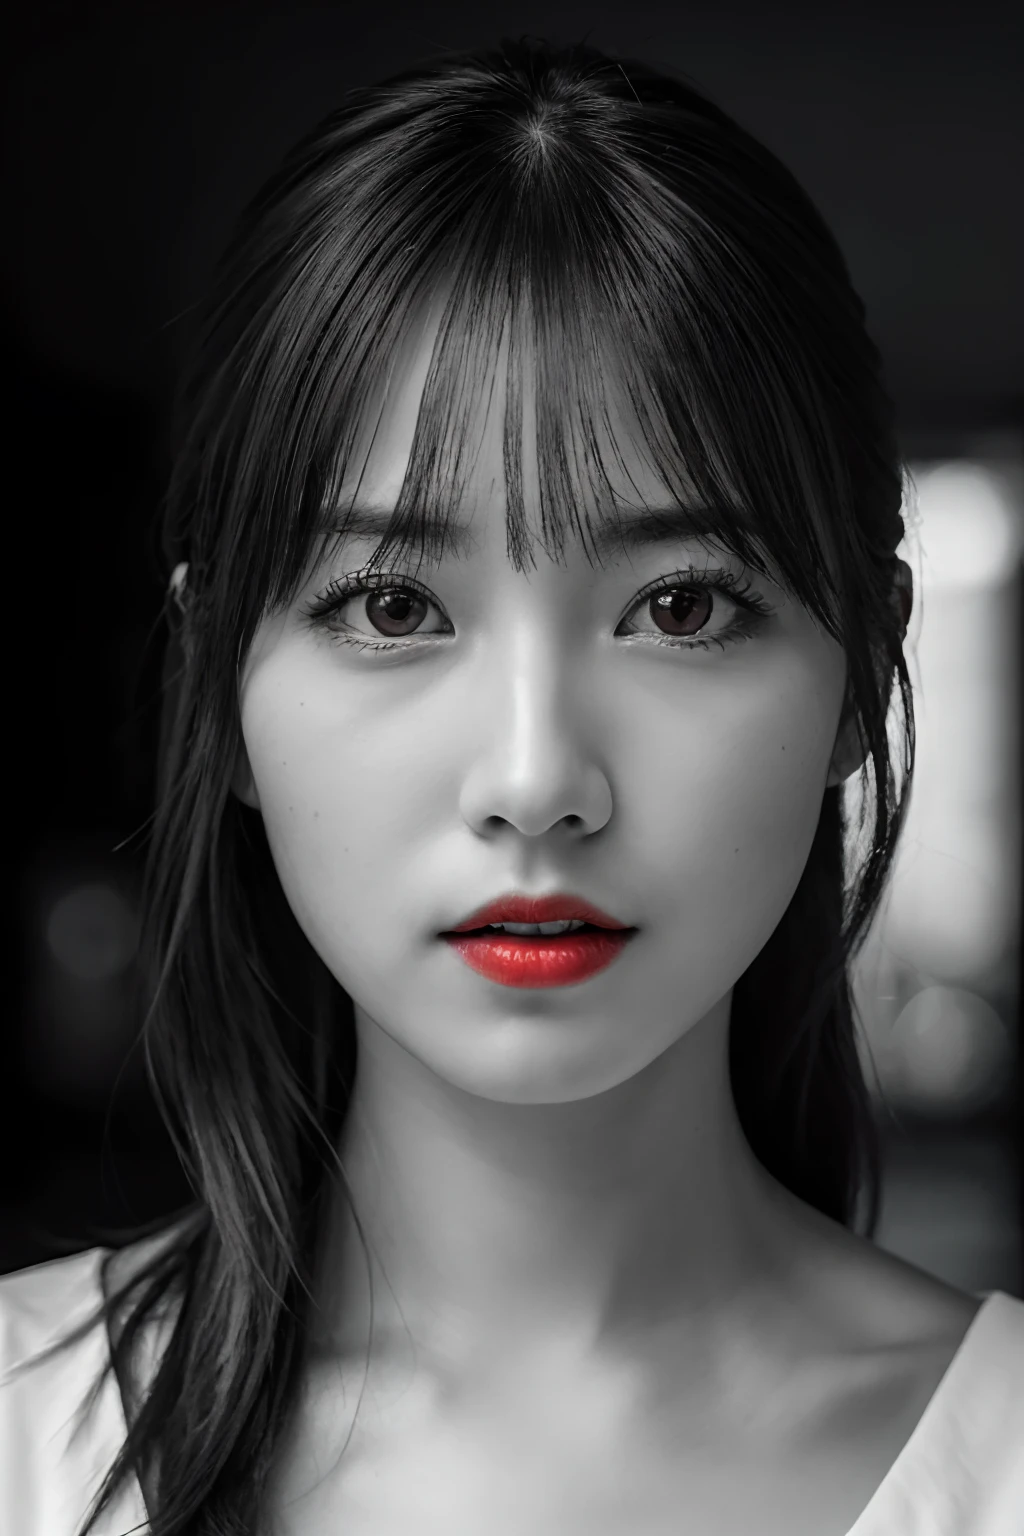 masutepiece, Best Quality, Photorealsitic, Ultra-detailed, finely detail, hight resolution, 8k wallpaper, Raw photography, Professional, high level of detail, (((Monochrome photography))), 1girl in, (Facing the front), The upper part of the body, face perfect, ((Only lips red))